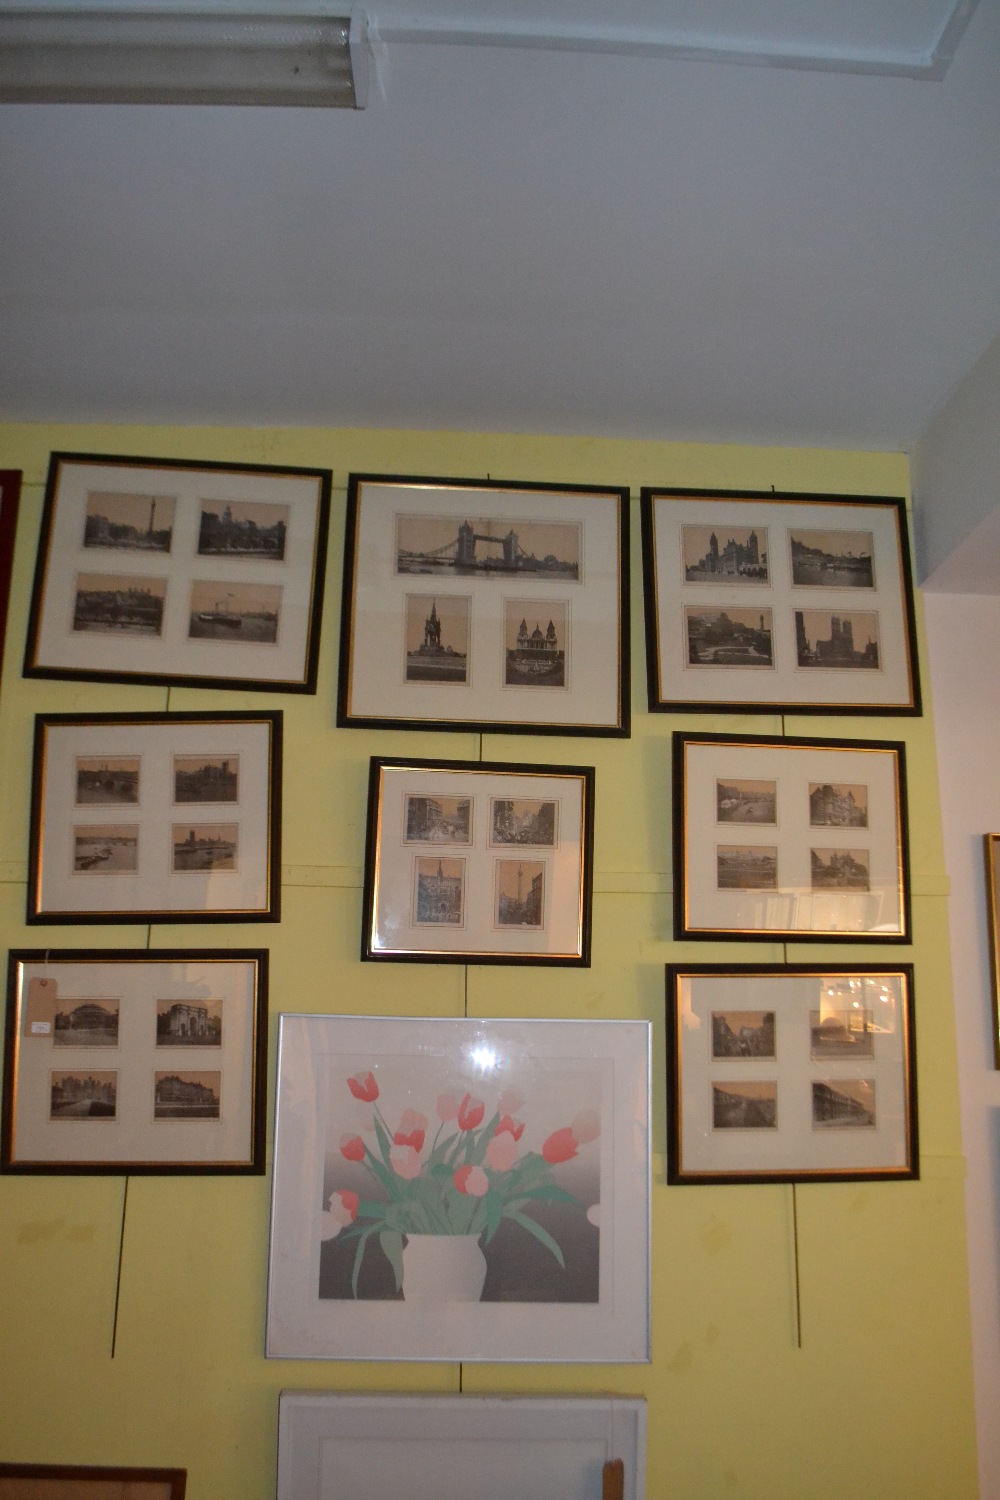 Eight framed and mounted examples displaying several monochrome pictures of London.